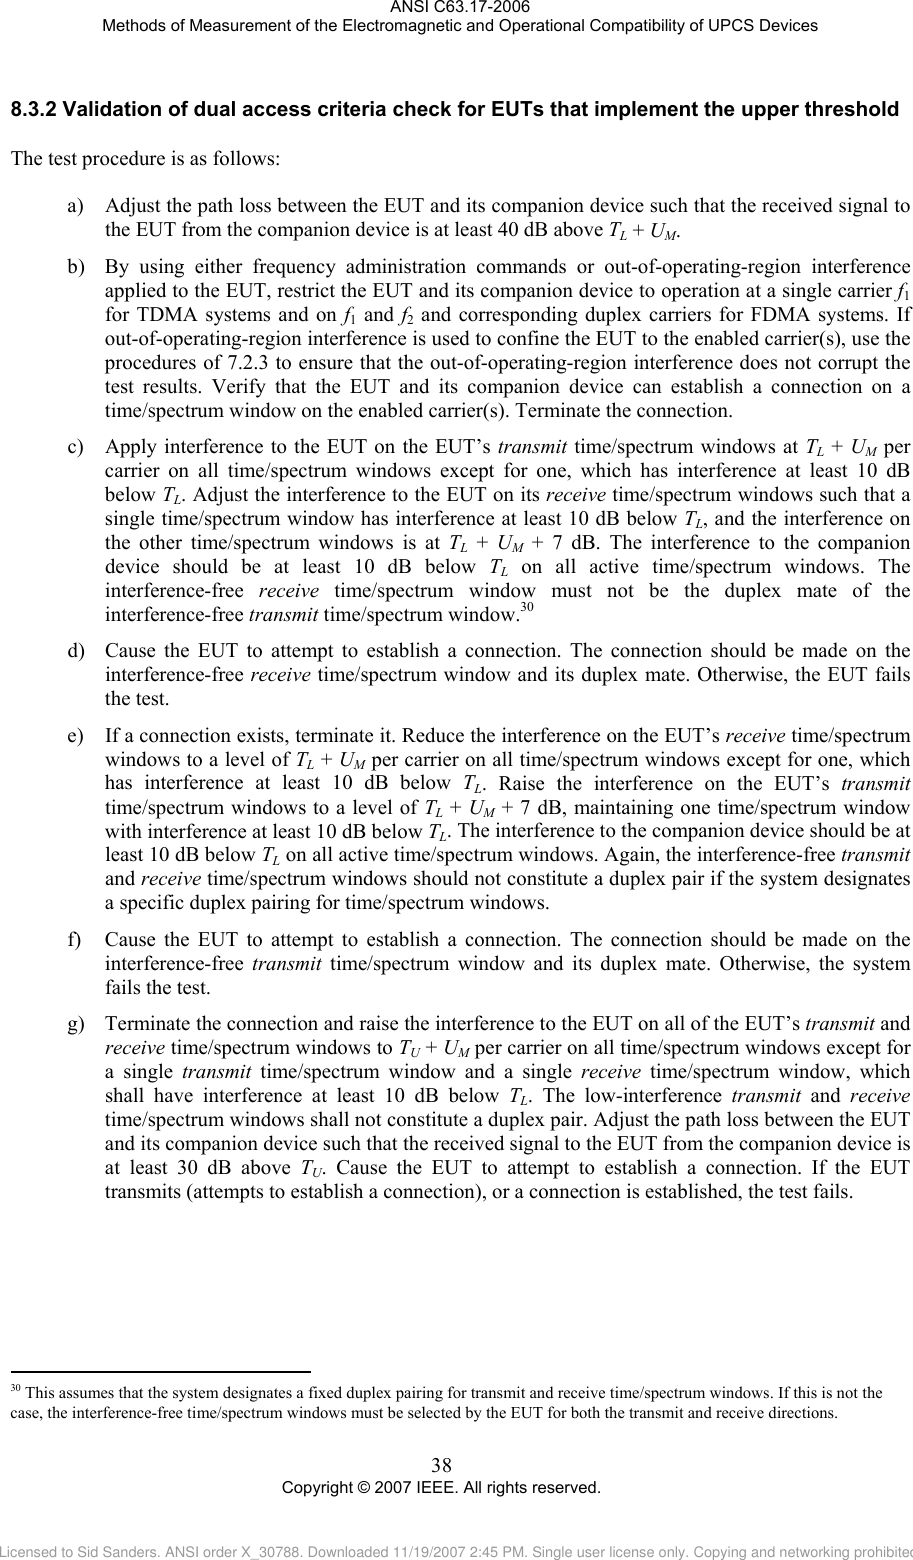 ANSI C63.17-2006 Methods of Measurement of the Electromagnetic and Operational Compatibility of UPCS Devices 8.3.2                                                 Validation of dual access criteria check for EUTs that implement the upper threshold The test procedure is as follows:  a) Adjust the path loss between the EUT and its companion device such that the received signal to the EUT from the companion device is at least 40 dB above TL + UM. b) By using either frequency administration commands or out-of-operating-region interference applied to the EUT, restrict the EUT and its companion device to operation at a single carrier f1 for TDMA systems and on f1 and f2 and corresponding duplex carriers for FDMA systems. If out-of-operating-region interference is used to confine the EUT to the enabled carrier(s), use the procedures of 7.2.3 to ensure that the out-of-operating-region interference does not corrupt the test results. Verify that the EUT and its companion device can establish a connection on a time/spectrum window on the enabled carrier(s). Terminate the connection. c) Apply interference to the EUT on the EUT’s transmit time/spectrum windows at TL + UM per carrier on all time/spectrum windows except for one, which has interference at least 10 dB below TL. Adjust the interference to the EUT on its receive time/spectrum windows such that a single time/spectrum window has interference at least 10 dB below TL, and the interference on the other time/spectrum windows is at TL + UM + 7 dB. The interference to the companion device should be at least 10 dB below TL on all active time/spectrum windows. The interference-free  receive time/spectrum window must not be the duplex mate of the interference-free transmit time/spectrum window.30  d) Cause the EUT to attempt to establish a connection. The connection should be made on the interference-free receive time/spectrum window and its duplex mate. Otherwise, the EUT fails the test. e) If a connection exists, terminate it. Reduce the interference on the EUT’s receive time/spectrum windows to a level of TL + UM per carrier on all time/spectrum windows except for one, which has interference at least 10 dB below TL. Raise the interference on the EUT’s transmit time/spectrum windows to a level of TL + UM + 7 dB, maintaining one time/spectrum window with interference at least 10 dB below TL. The interference to the companion device should be at least 10 dB below TL on all active time/spectrum windows. Again, the interference-free transmit and receive time/spectrum windows should not constitute a duplex pair if the system designates a specific duplex pairing for time/spectrum windows. f) Cause the EUT to attempt to establish a connection. The connection should be made on the interference-free  transmit time/spectrum window and its duplex mate. Otherwise, the system fails the test. g) Terminate the connection and raise the interference to the EUT on all of the EUT’s transmit and receive time/spectrum windows to TU + UM per carrier on all time/spectrum windows except for a single transmit time/spectrum window and a single receive time/spectrum window, which shall have interference at least 10 dB below TL. The low-interference transmit and receive time/spectrum windows shall not constitute a duplex pair. Adjust the path loss between the EUT and its companion device such that the received signal to the EUT from the companion device is at least 30 dB above TU. Cause the EUT to attempt to establish a connection. If the EUT transmits (attempts to establish a connection), or a connection is established, the test fails.  30 This assumes that the system designates a fixed duplex pairing for transmit and receive time/spectrum windows. If this is not the case, the interference-free time/spectrum windows must be selected by the EUT for both the transmit and receive directions. 38 Copyright © 2007 IEEE. All rights reserved. Licensed to Sid Sanders. ANSI order X_30788. Downloaded 11/19/2007 2:45 PM. Single user license only. Copying and networking prohibited.